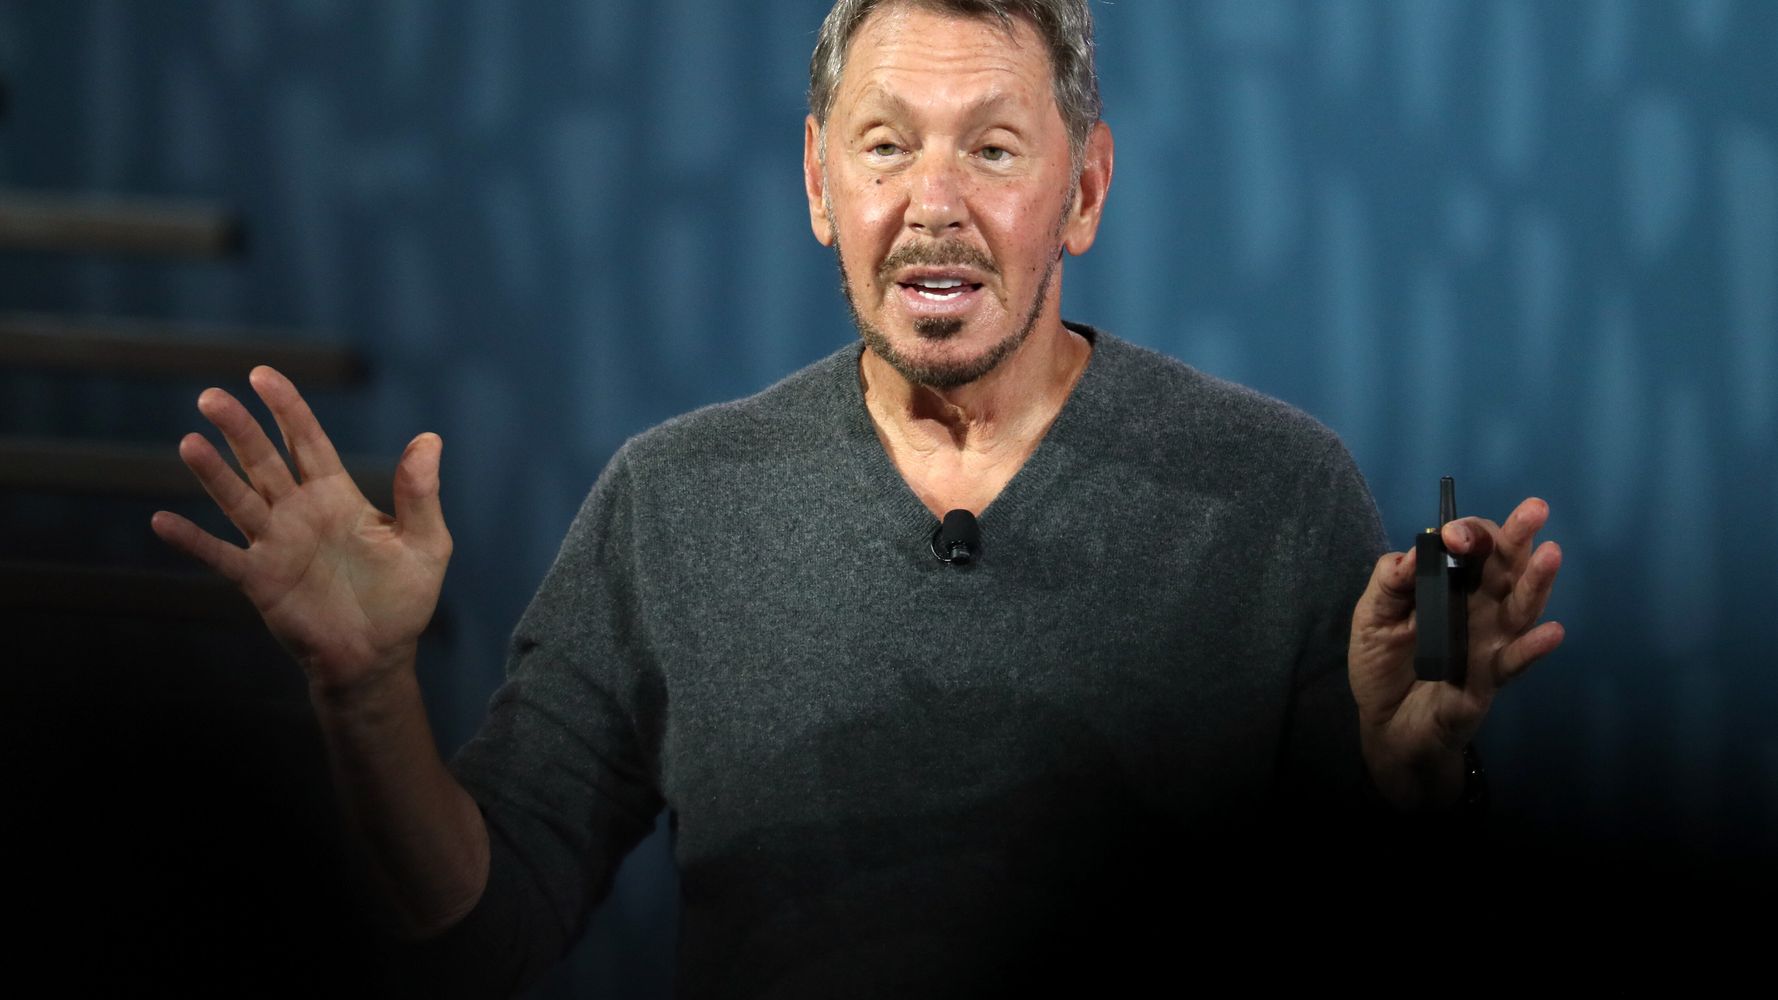 Oracle's Larry Ellison Took Part In 2020 Call About Contesting Trump's Election Loss: Report